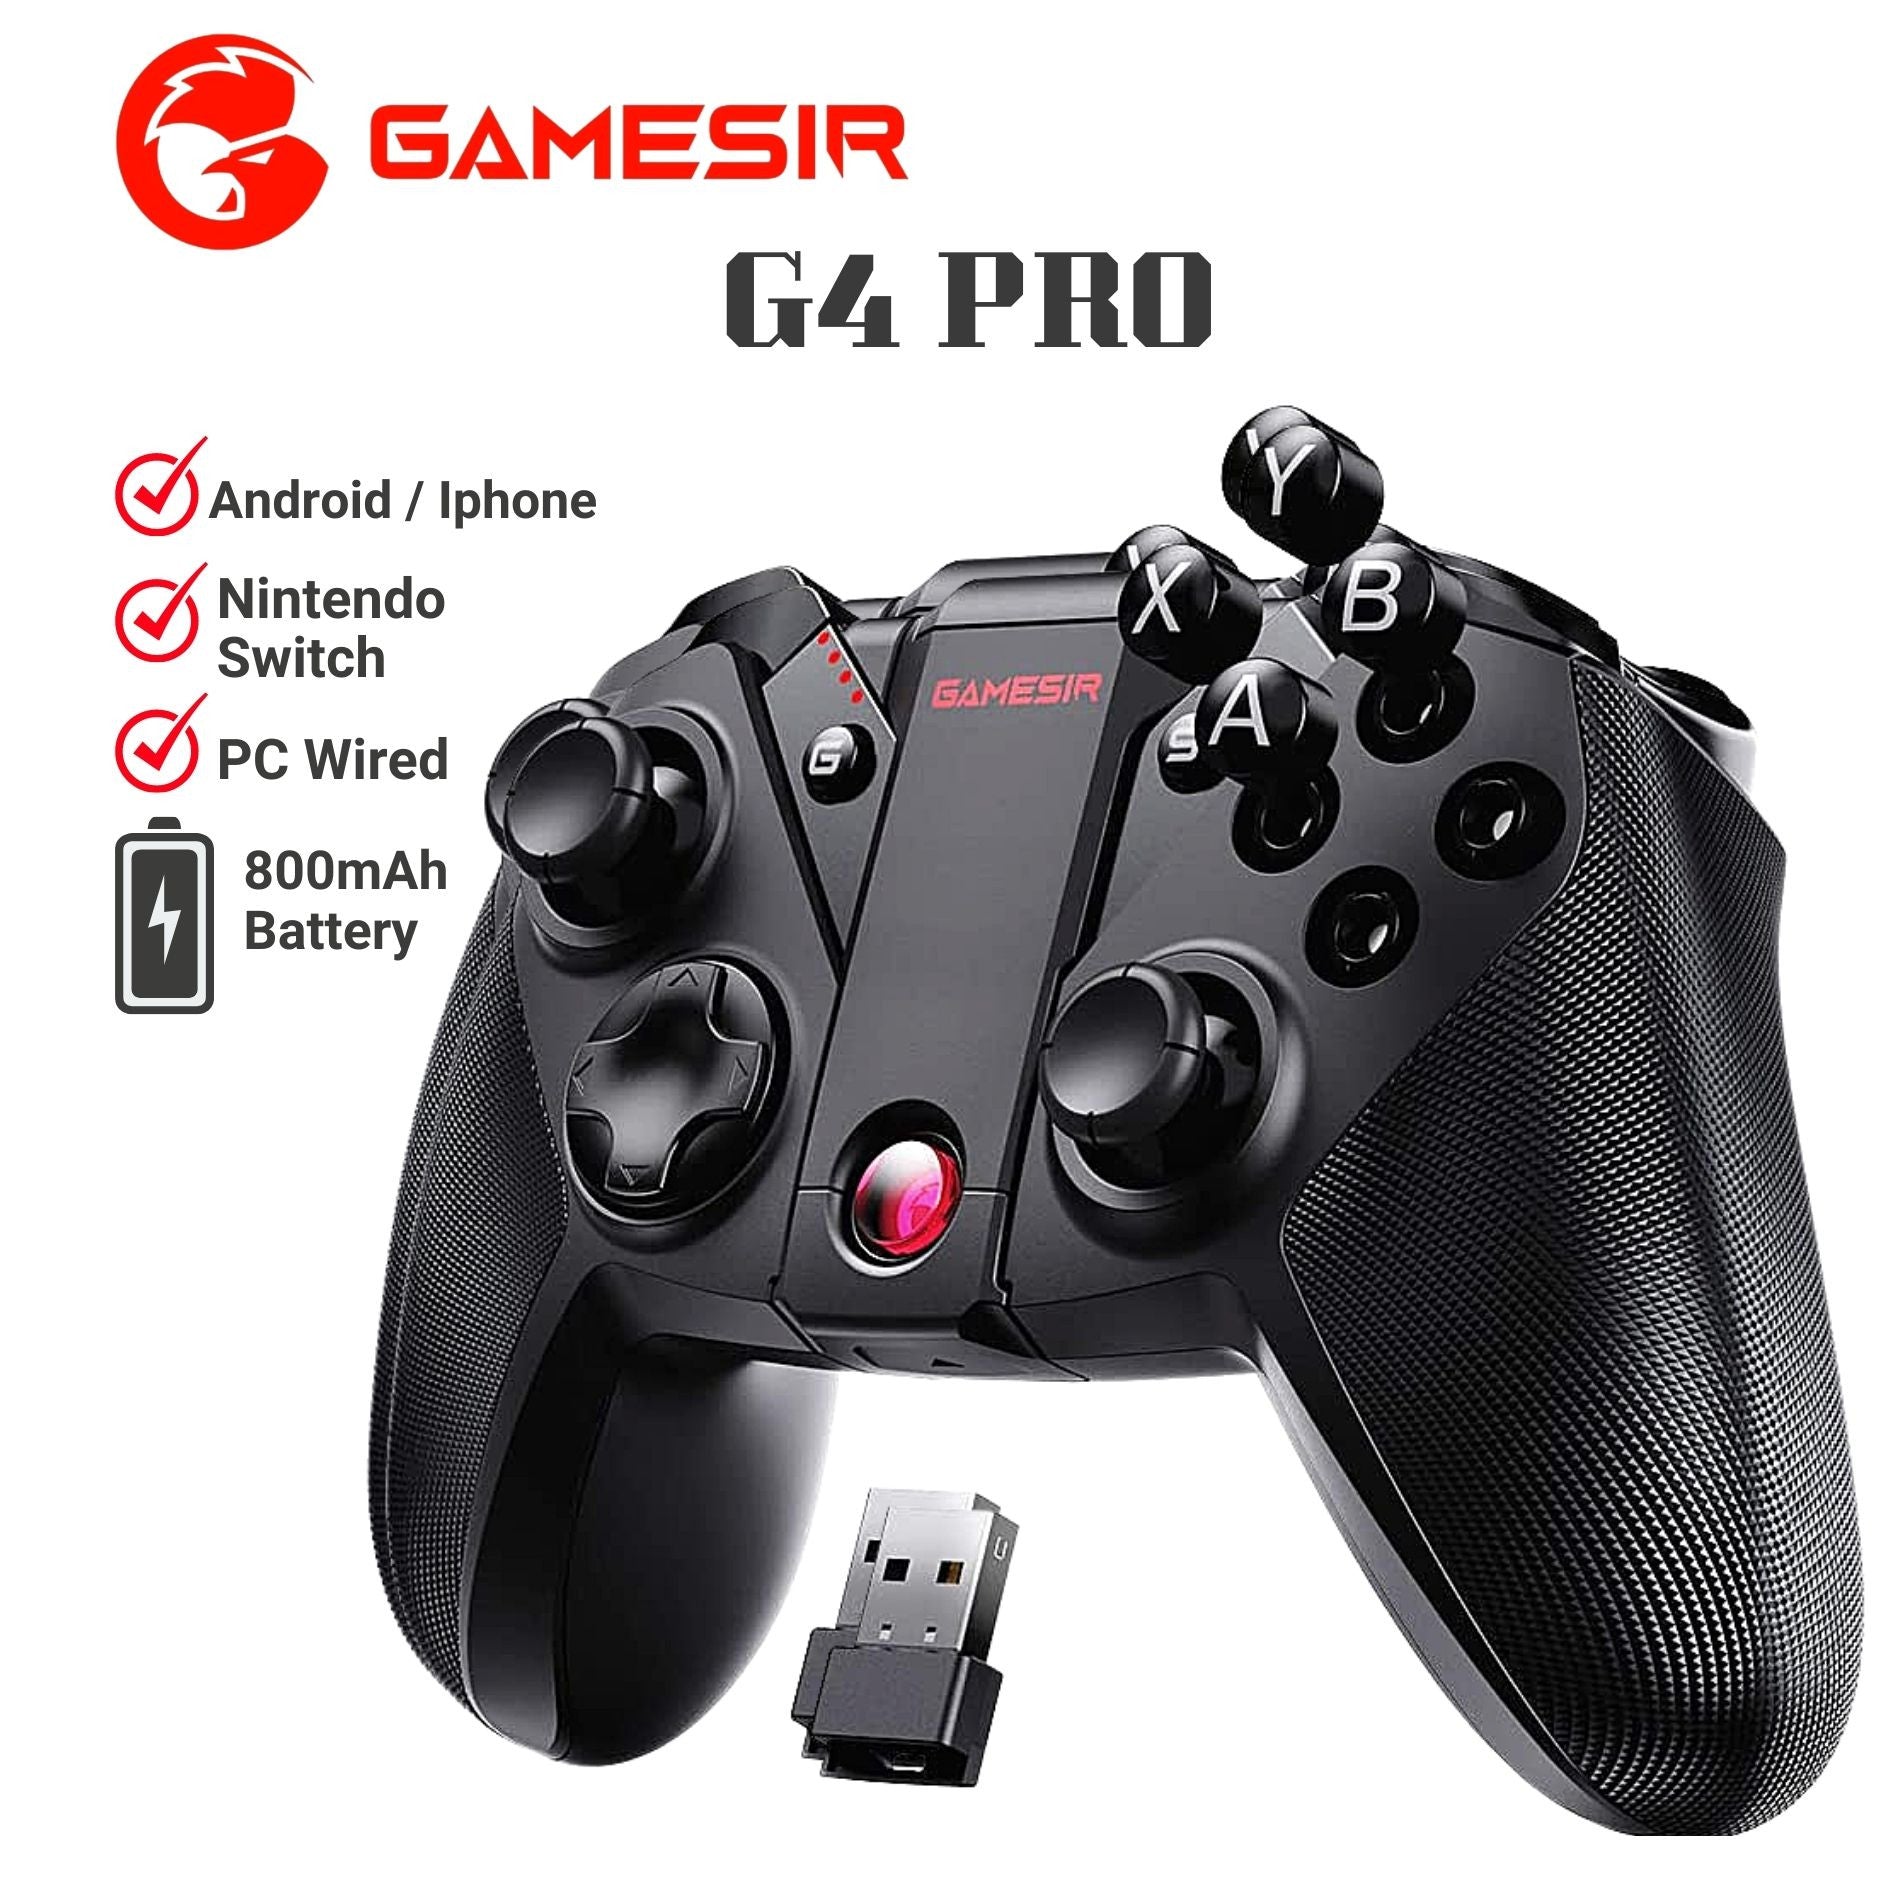 GameSir G4 Pro Wireless Game Controller iPhone, Android, Switch, a – IRGOTECH